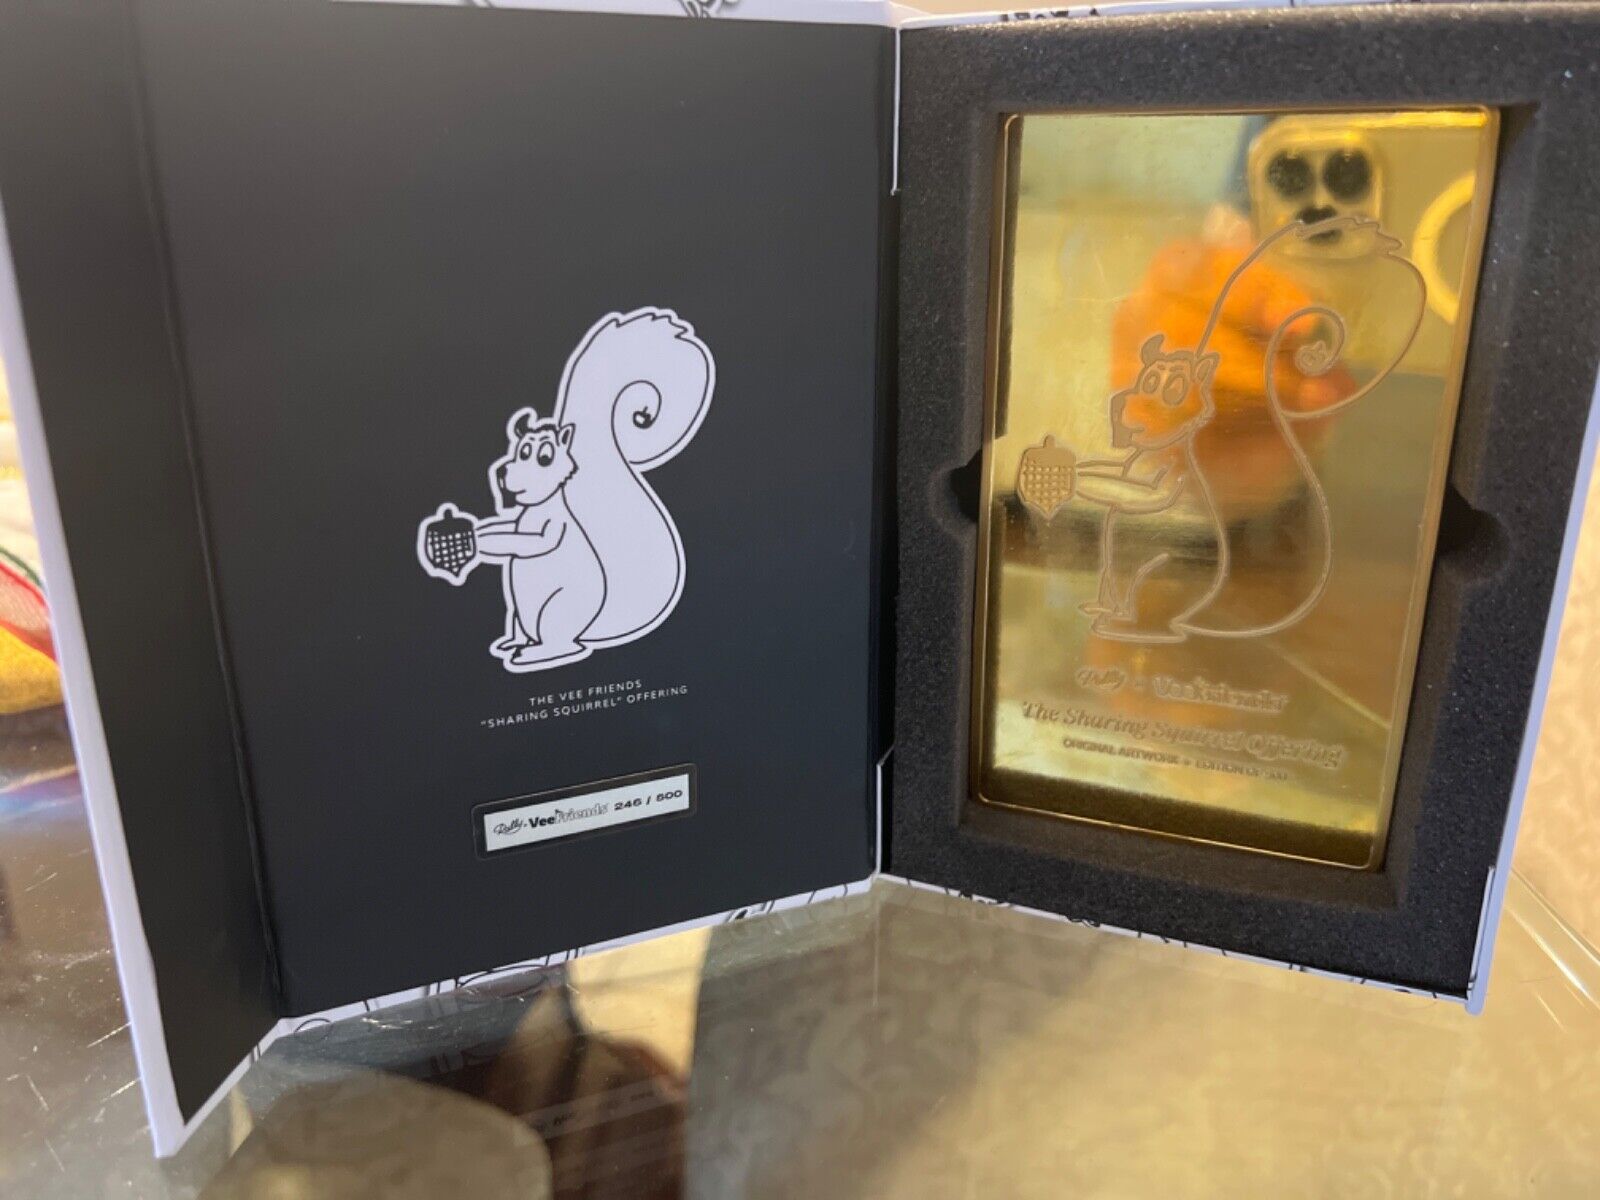 Rally X VeeFriends Rare Sharing Squirrel Limited to /500 GOLD Plated Gary Vee